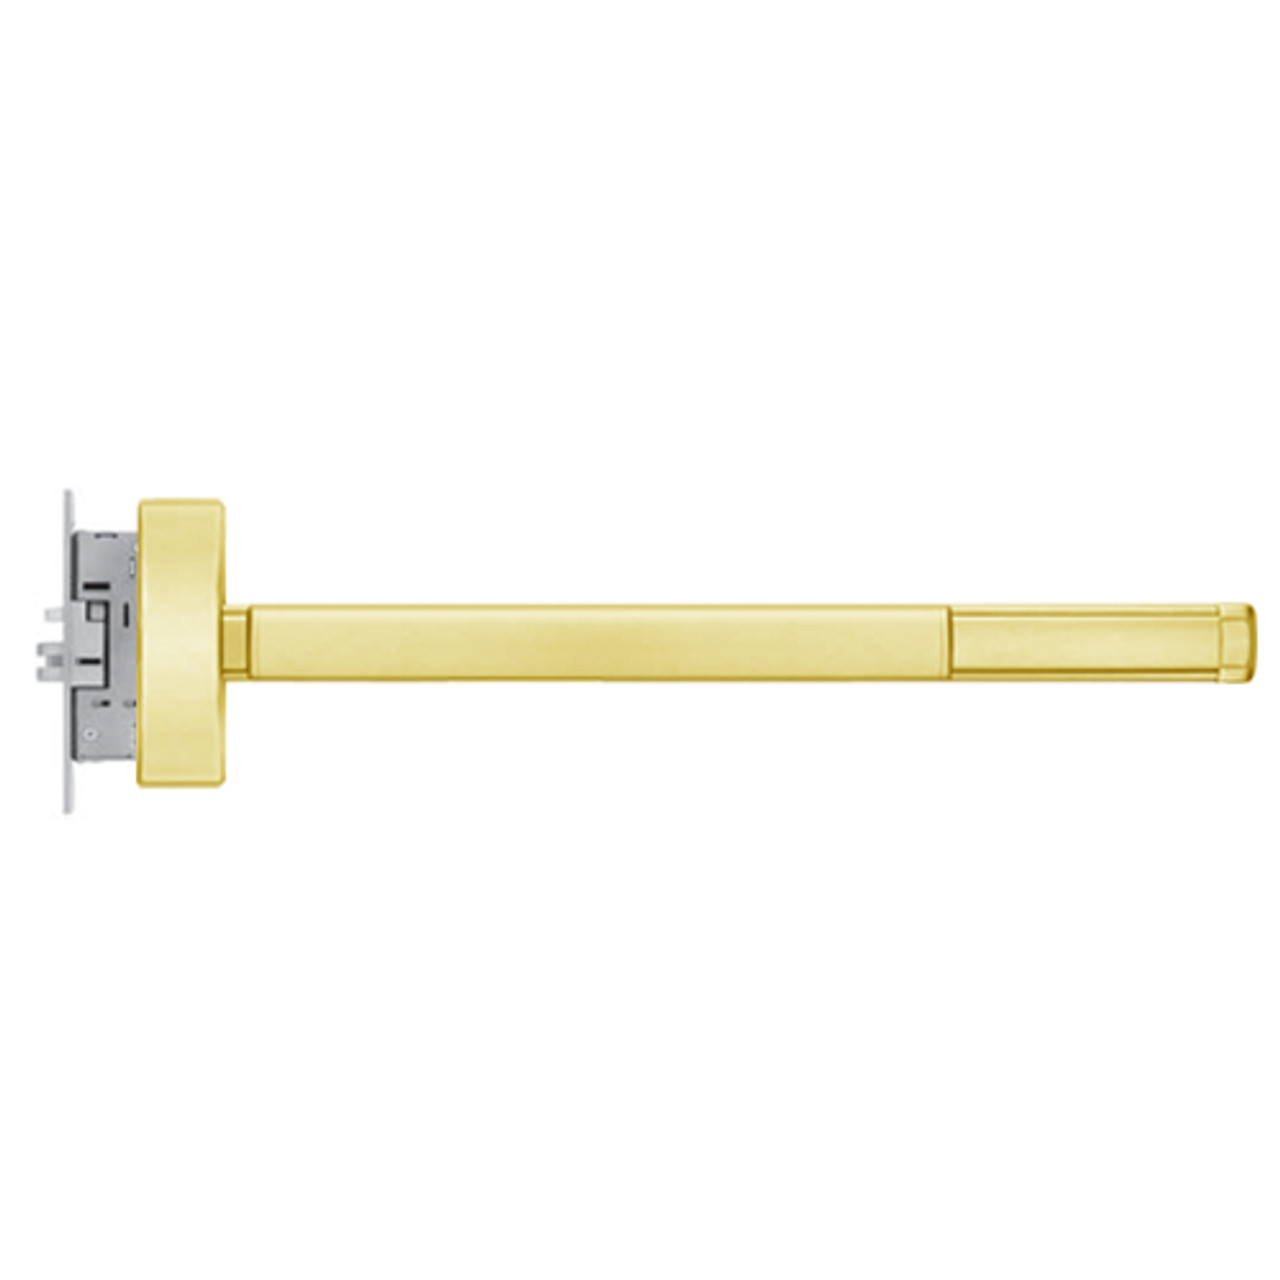 DEFL2303-RHR-605-36 PHI 2300 Series Fire Rated Apex Mortise Exit Device with Delayed Egress Prepped for Key Retracts Latchbolt in Bright Brass Finish